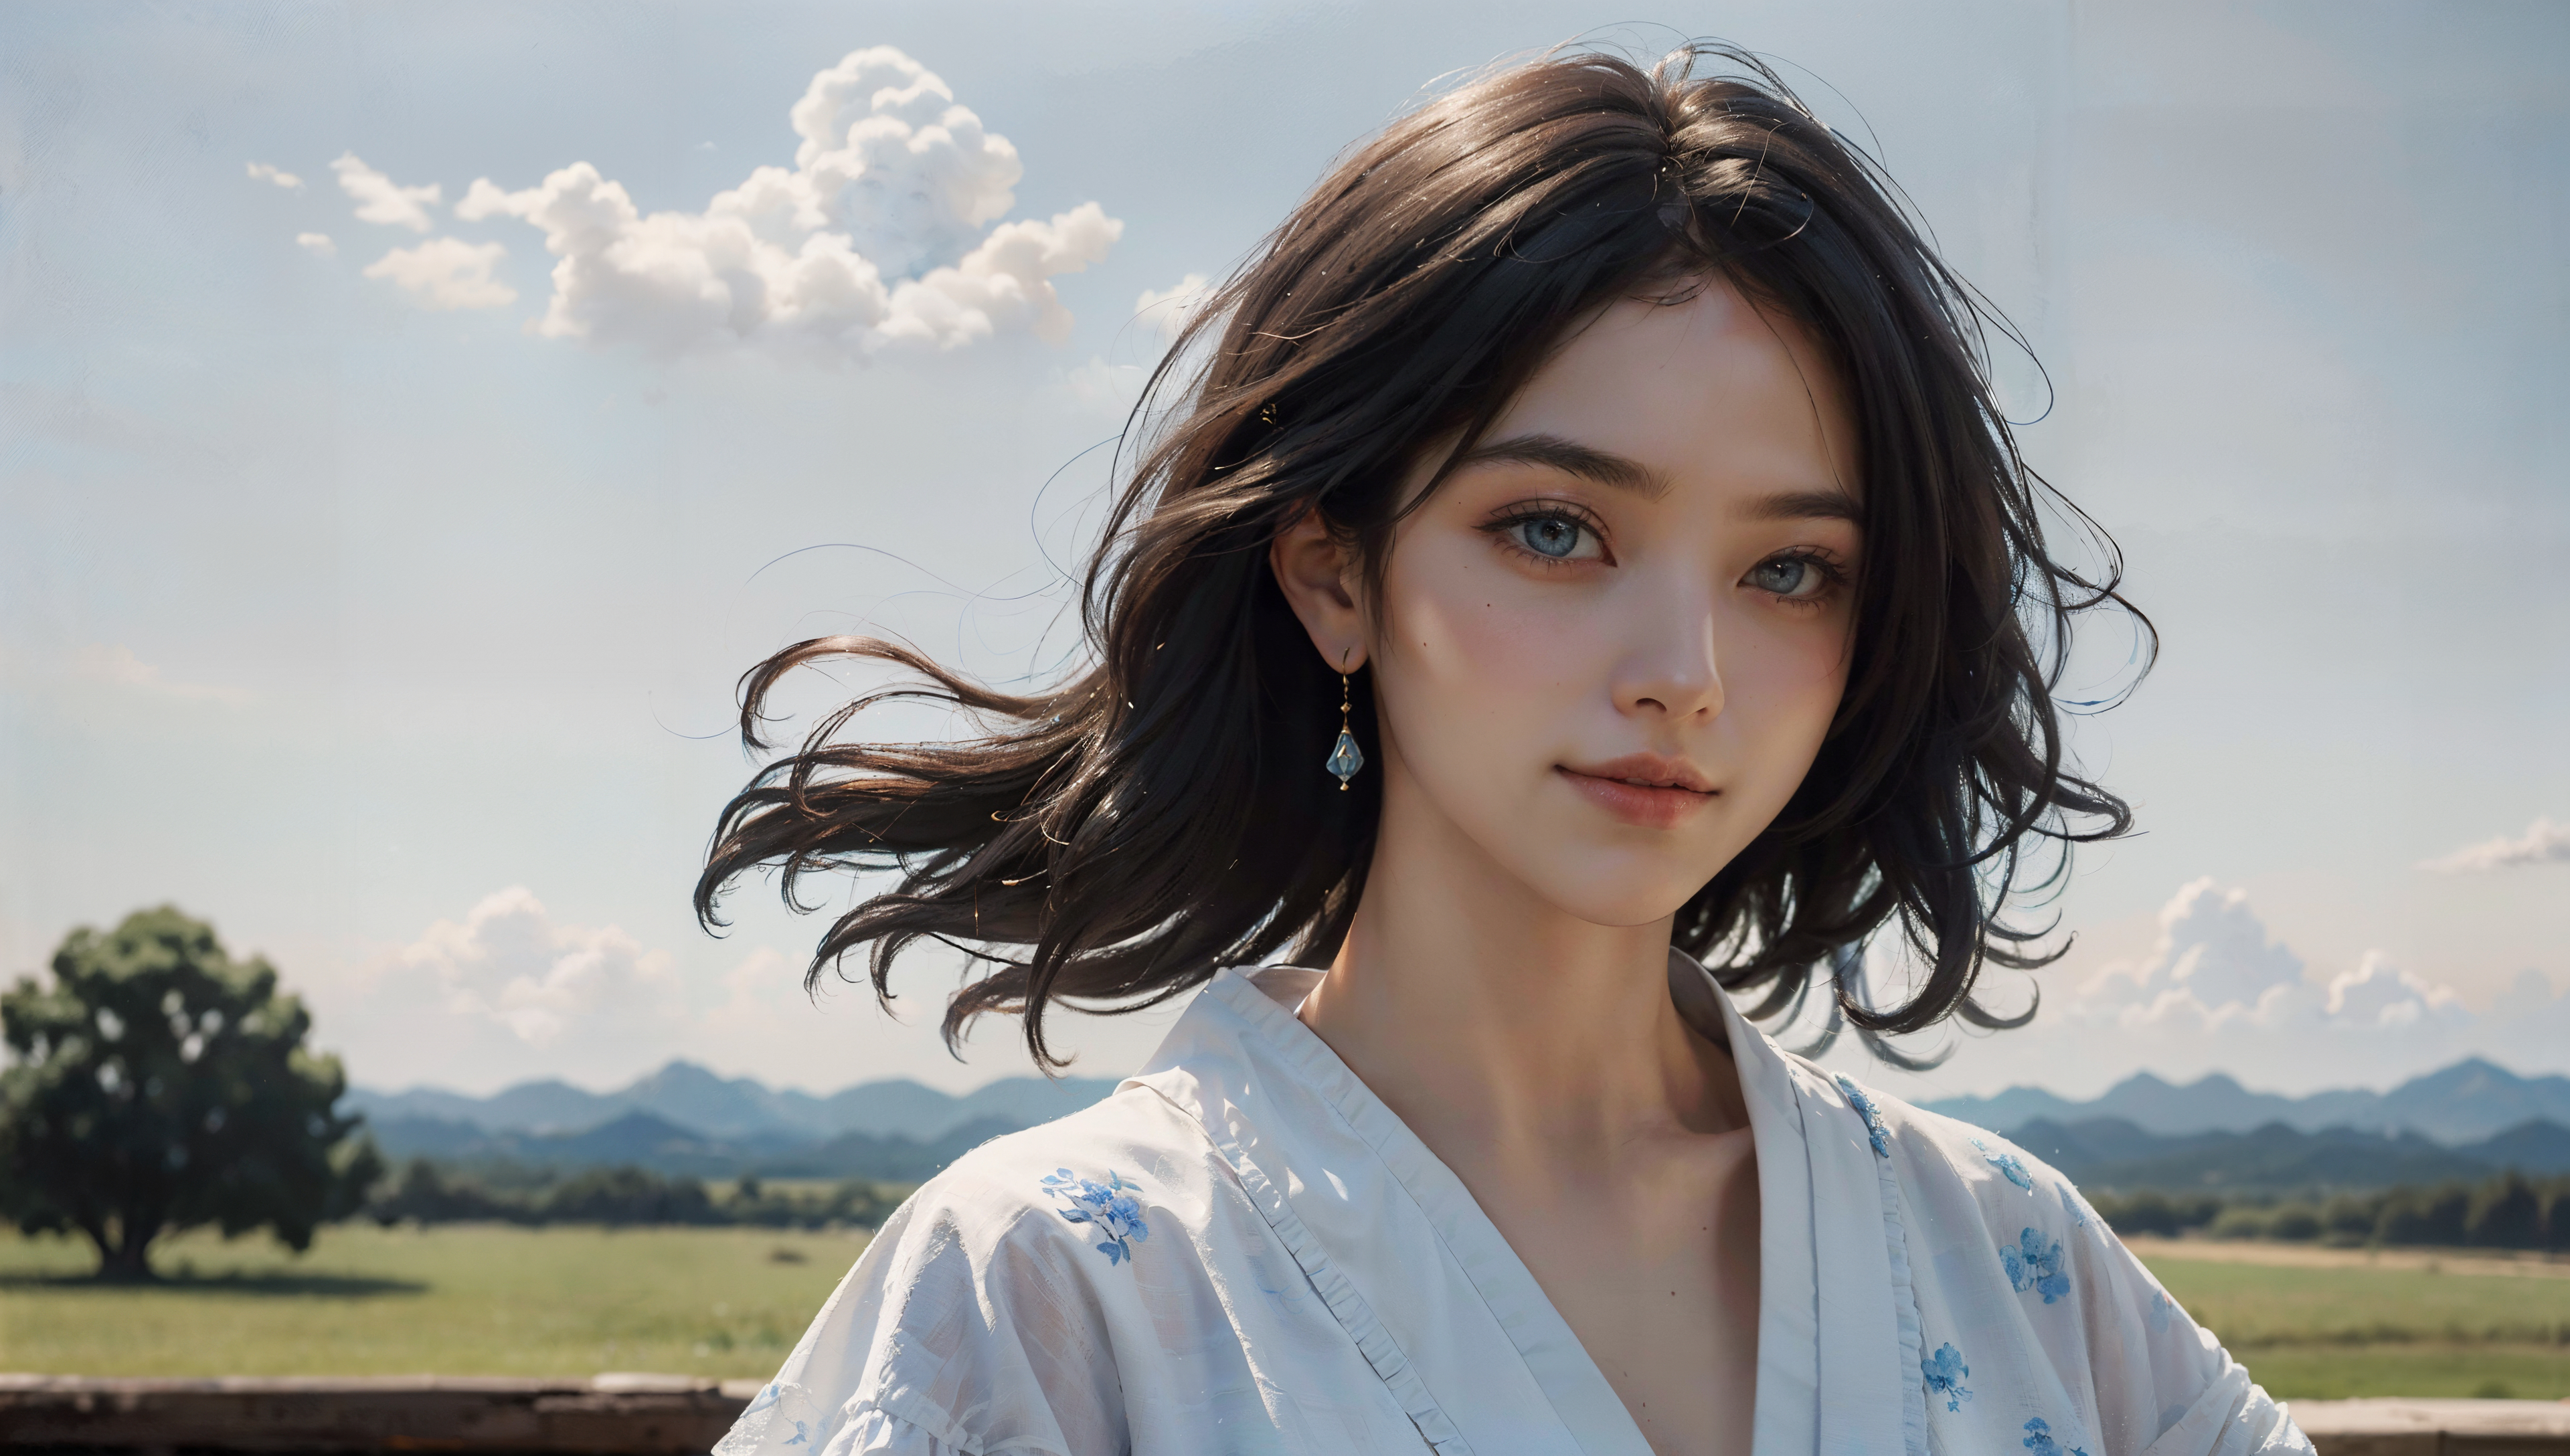 General 3840x2176 women AI art Asian hair blowing in the wind sky clouds earring looking at viewer smiling mountains trees grass